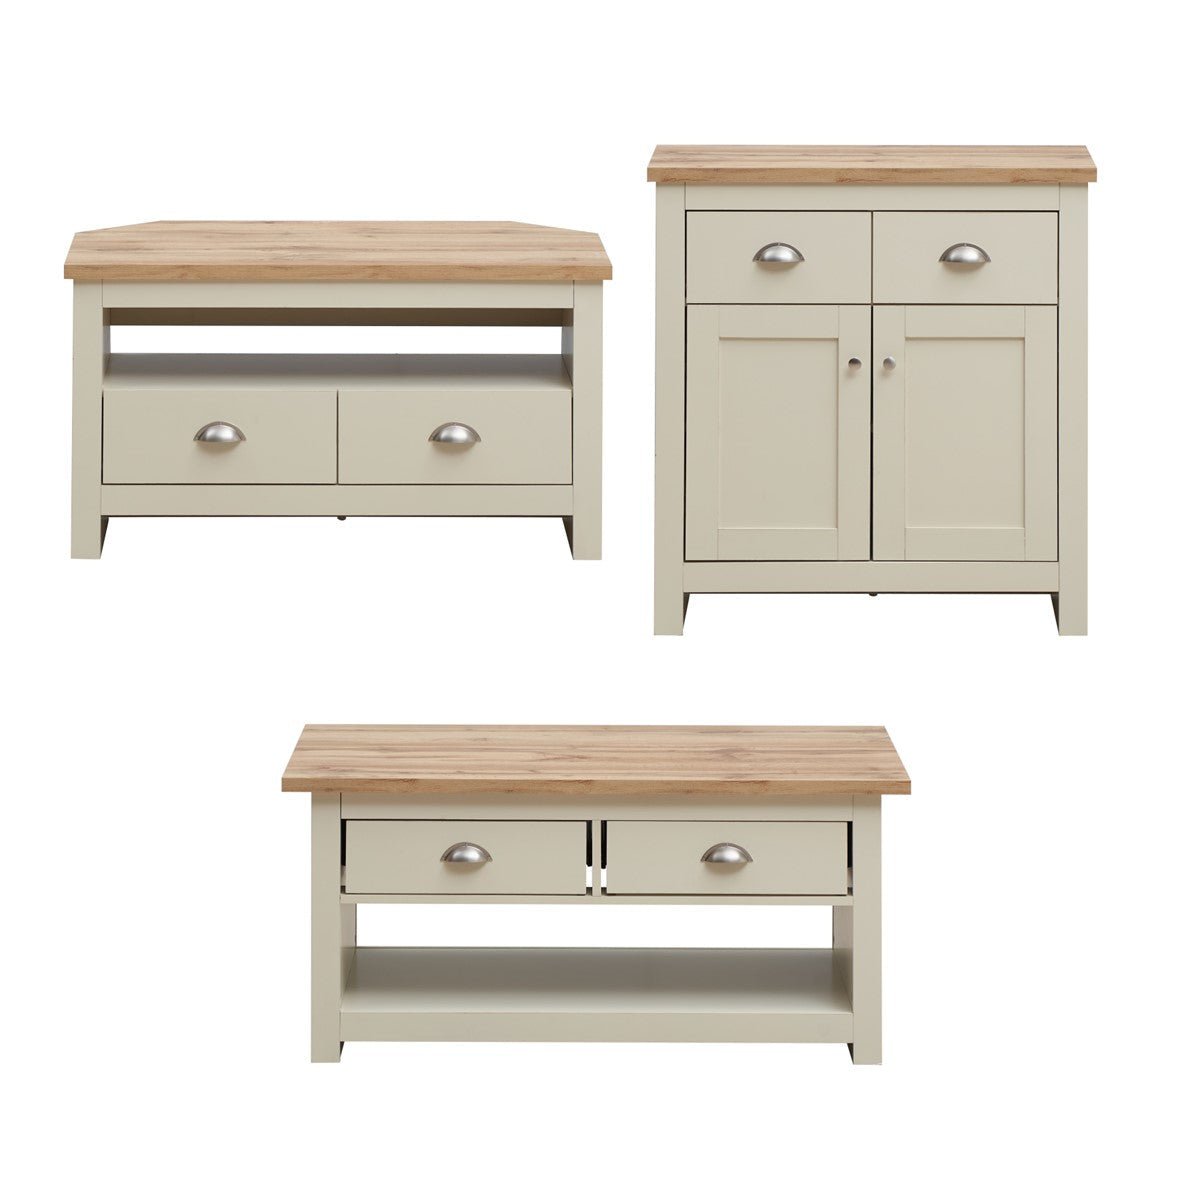 Lisbon Piece Set Corner TV Unit Drawers, Doors Drawer Sideboard, Coffee Table allhomely